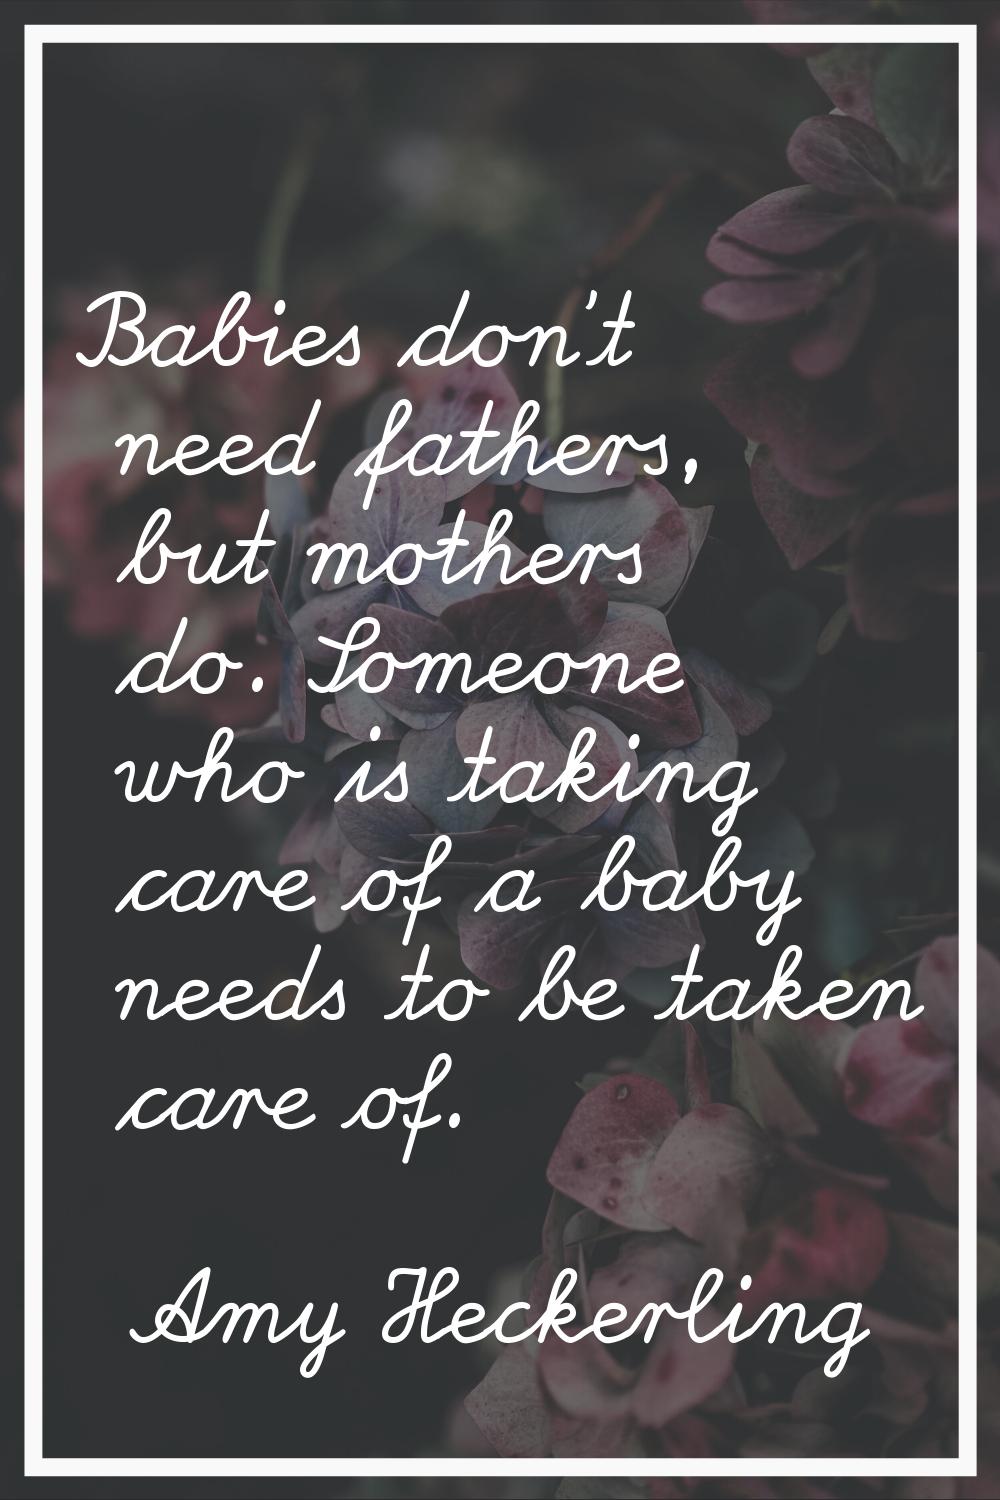 Babies don't need fathers, but mothers do. Someone who is taking care of a baby needs to be taken c